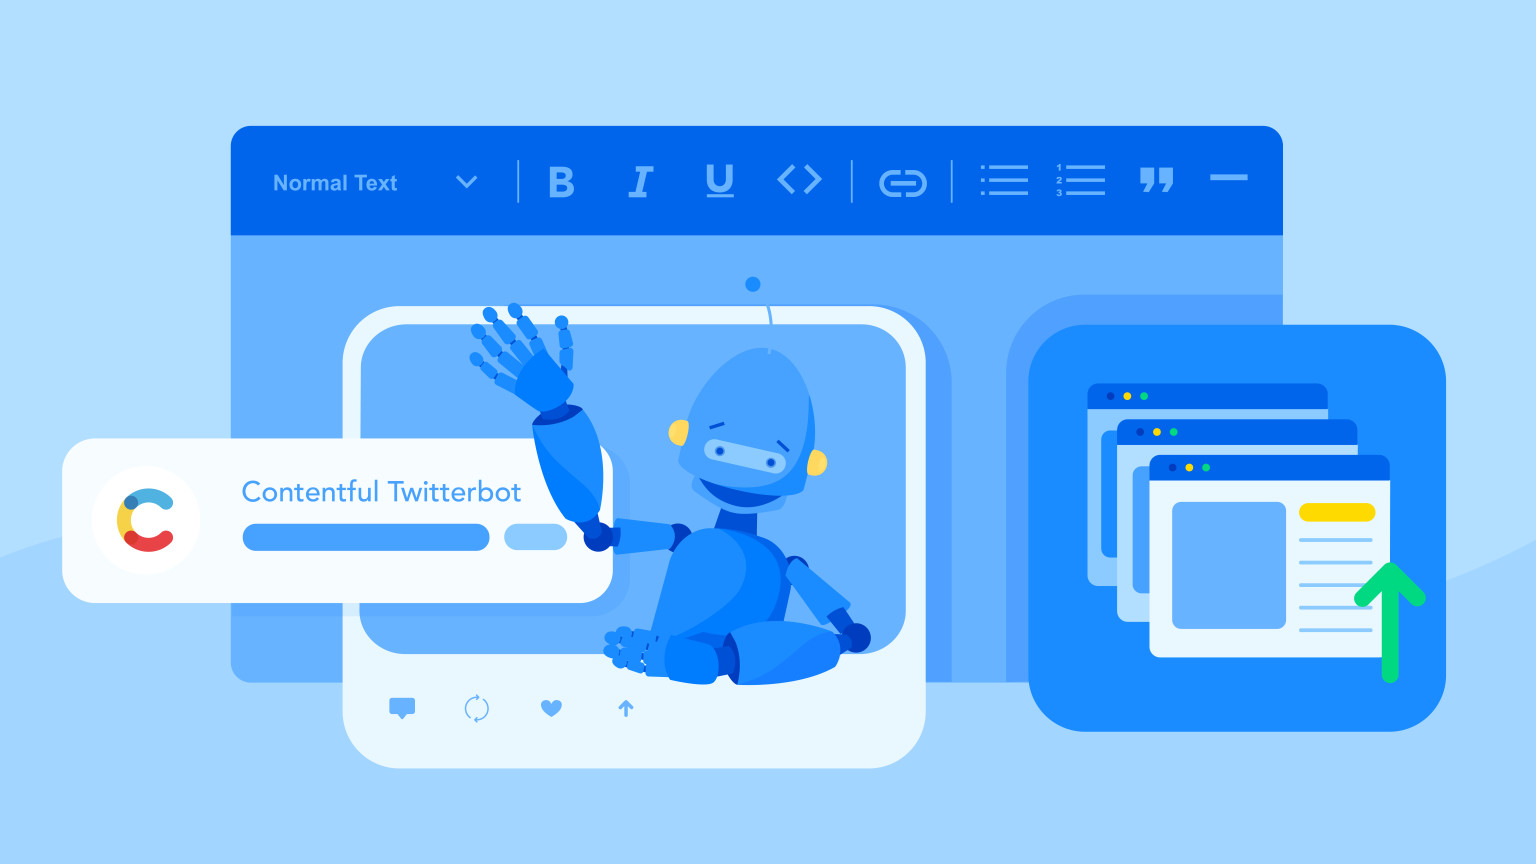 Illustration of a robot waving hello from the screen, wiht the Contentful web app on it